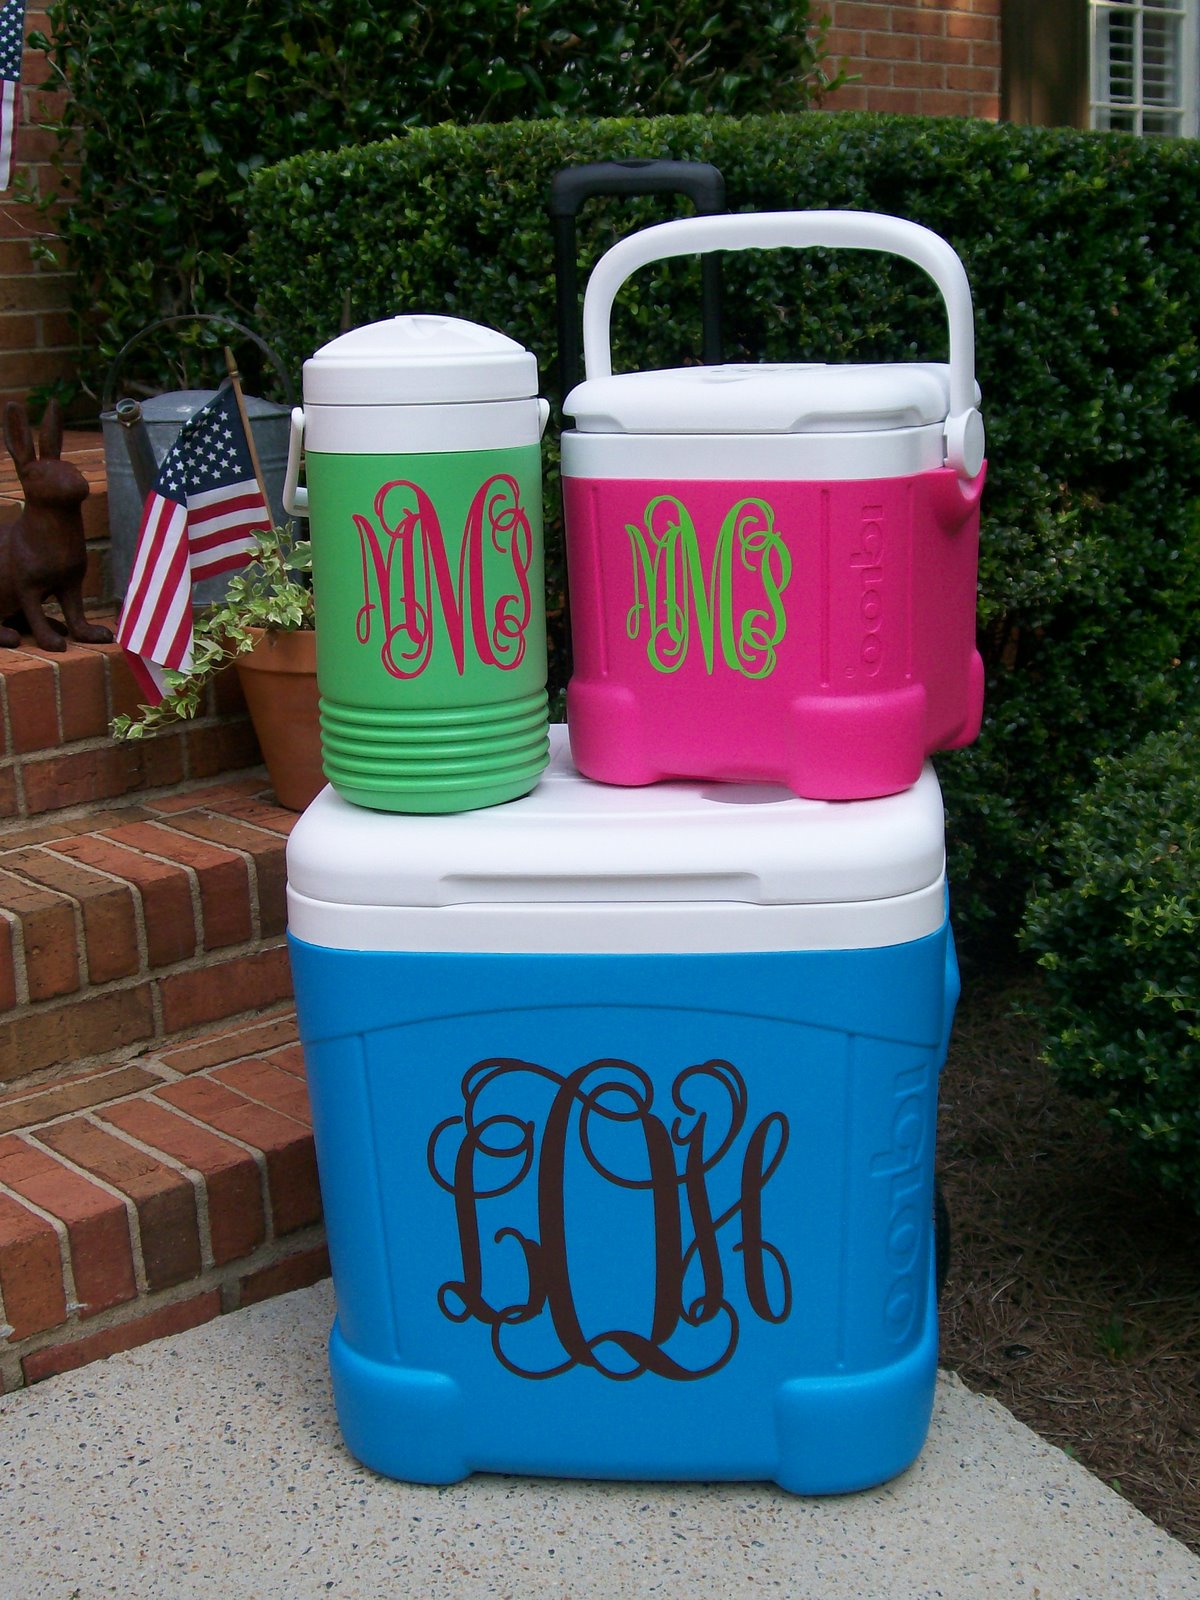 Bubbly and Bows: Make your own monogrammed item!